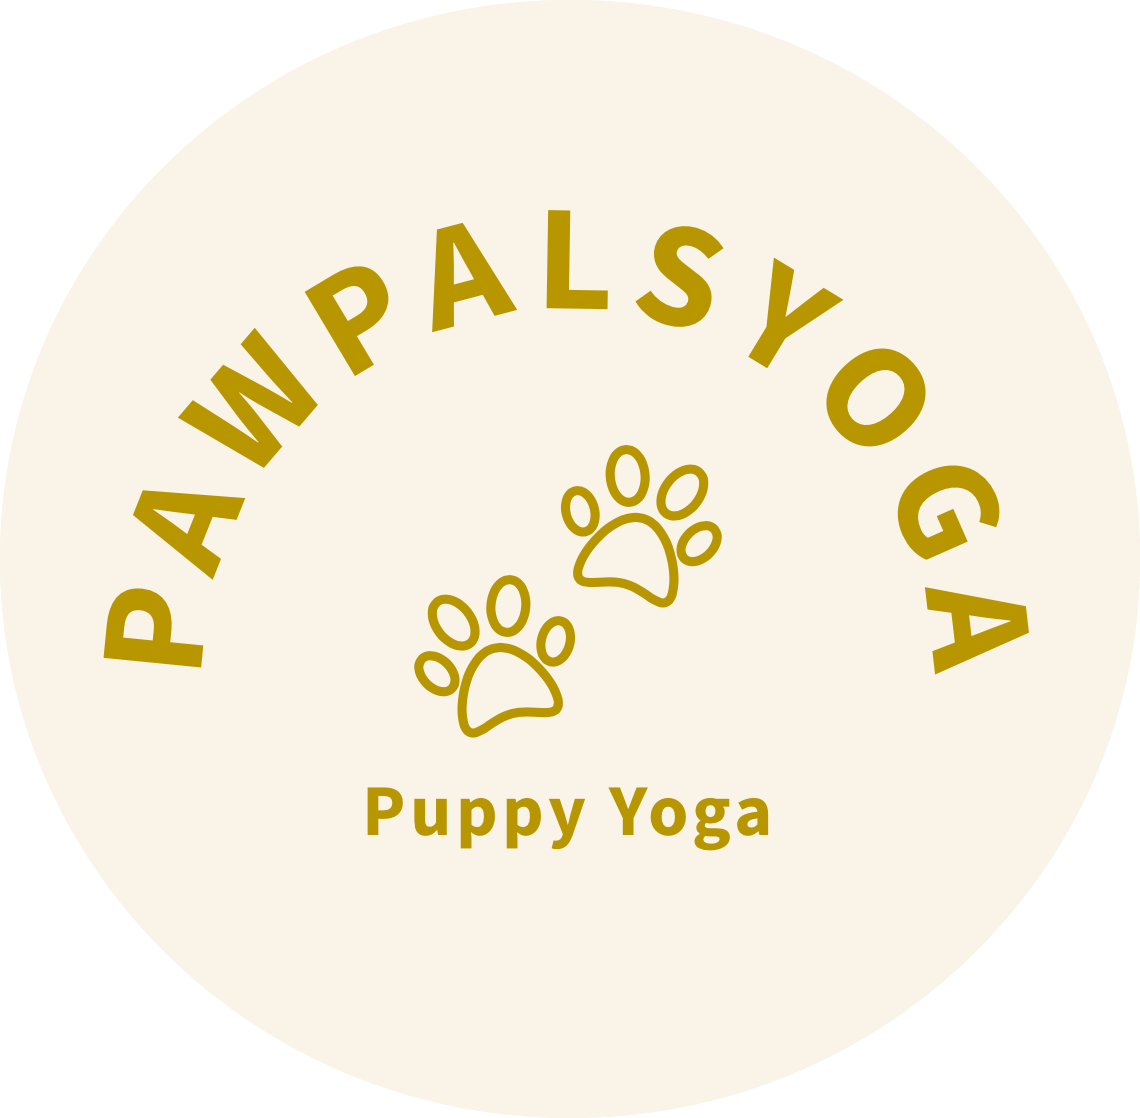 PawPals Puppy Yoga branded logo